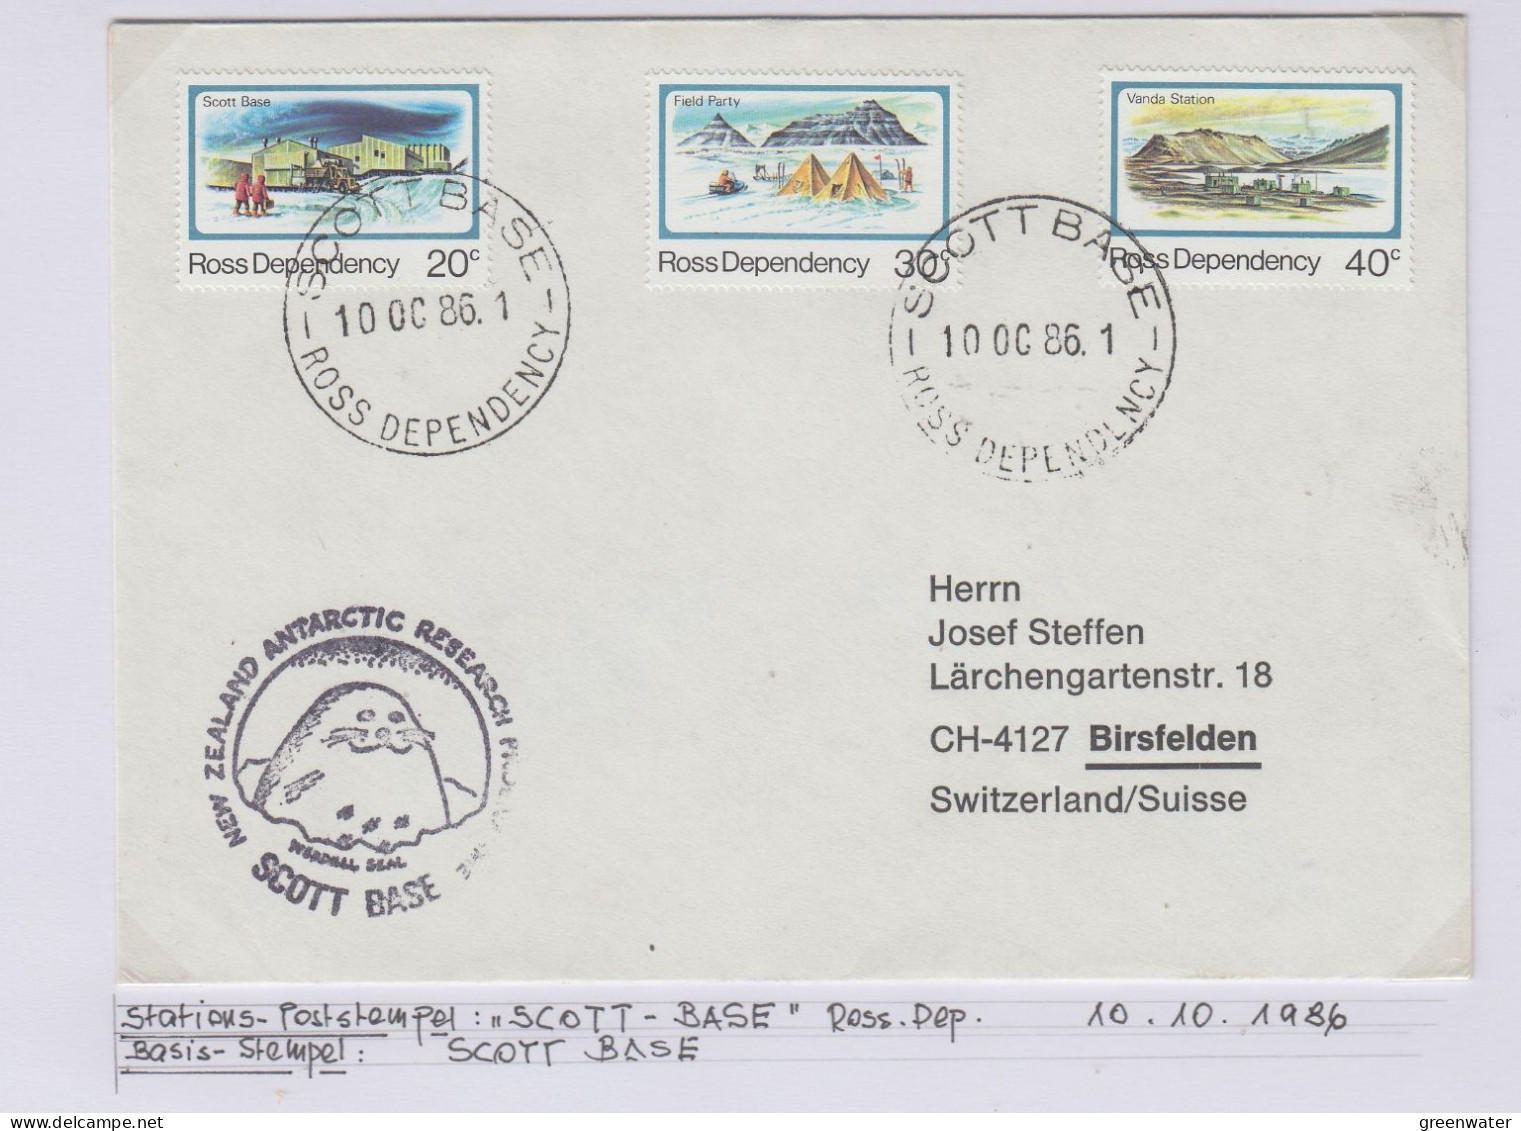 Ross Dependency Cover  NZ  Antarctic Research  Expedition Ca Scott Base 10 OCT 1986 (WB166) - Covers & Documents